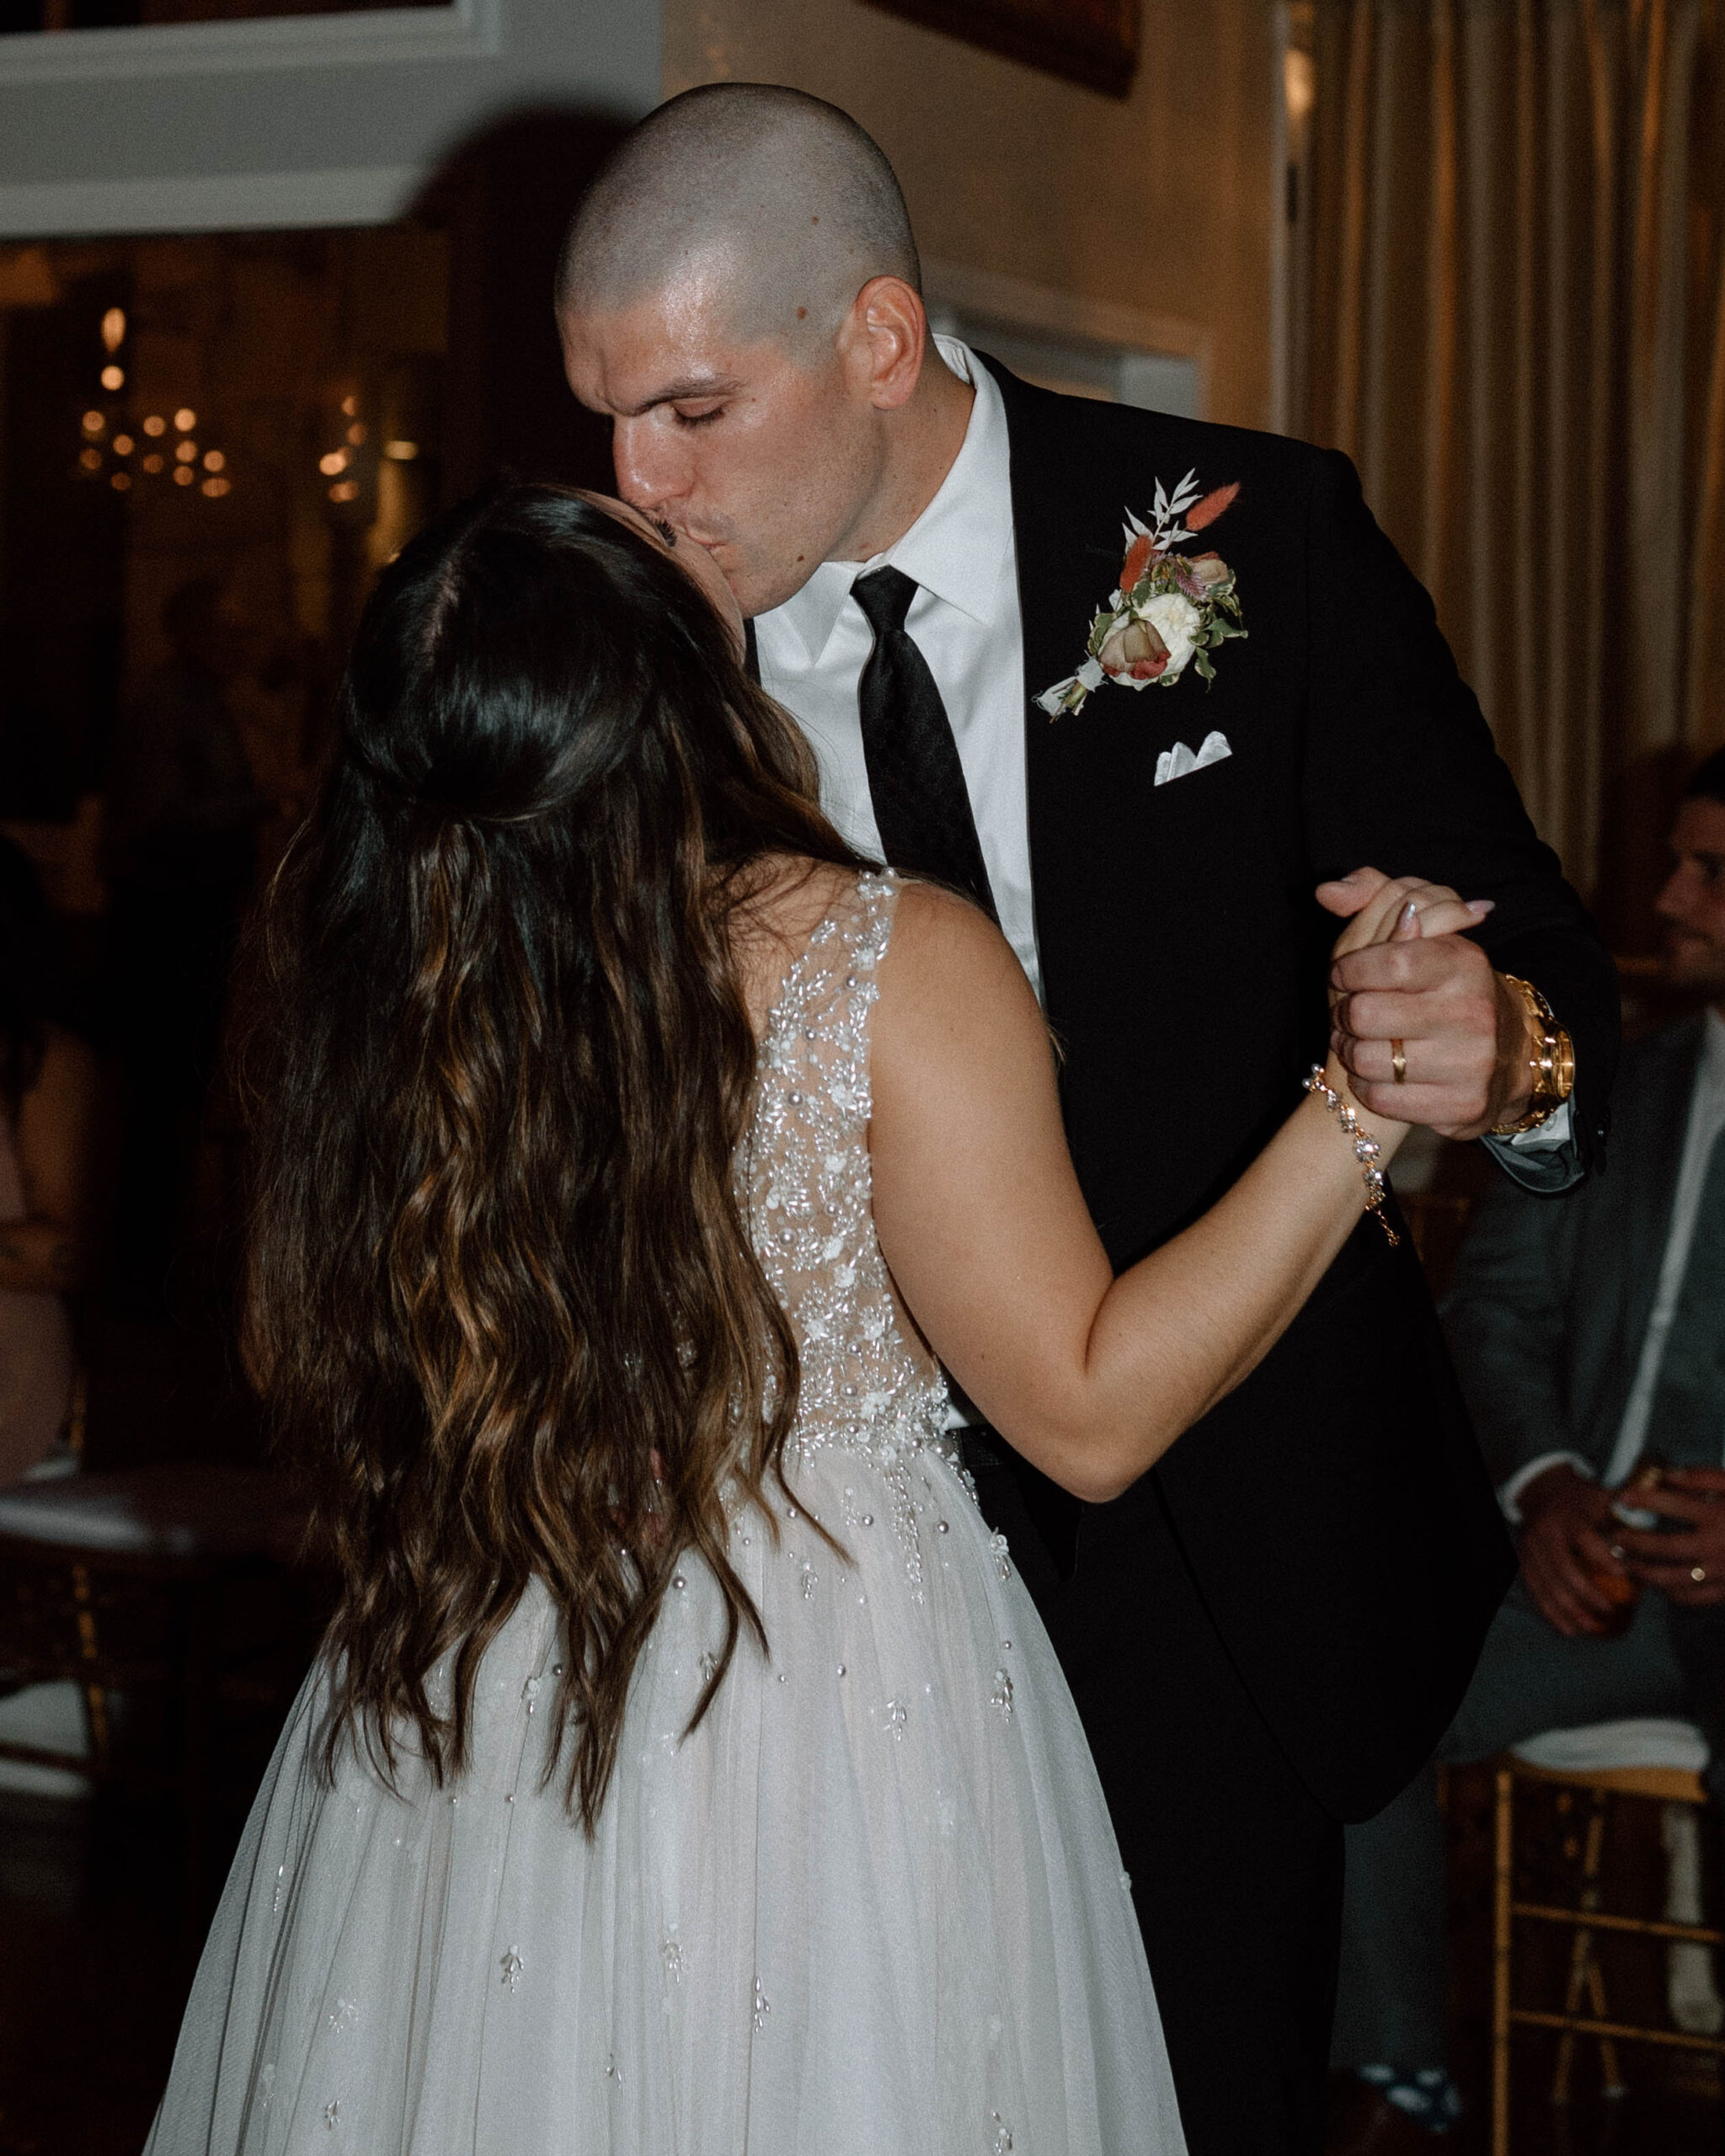 Heartfelt first dance moment captured at Casa Blanca Wedding, as the newlyweds share a tender embrace amidst twinkling lights and joyous celebration